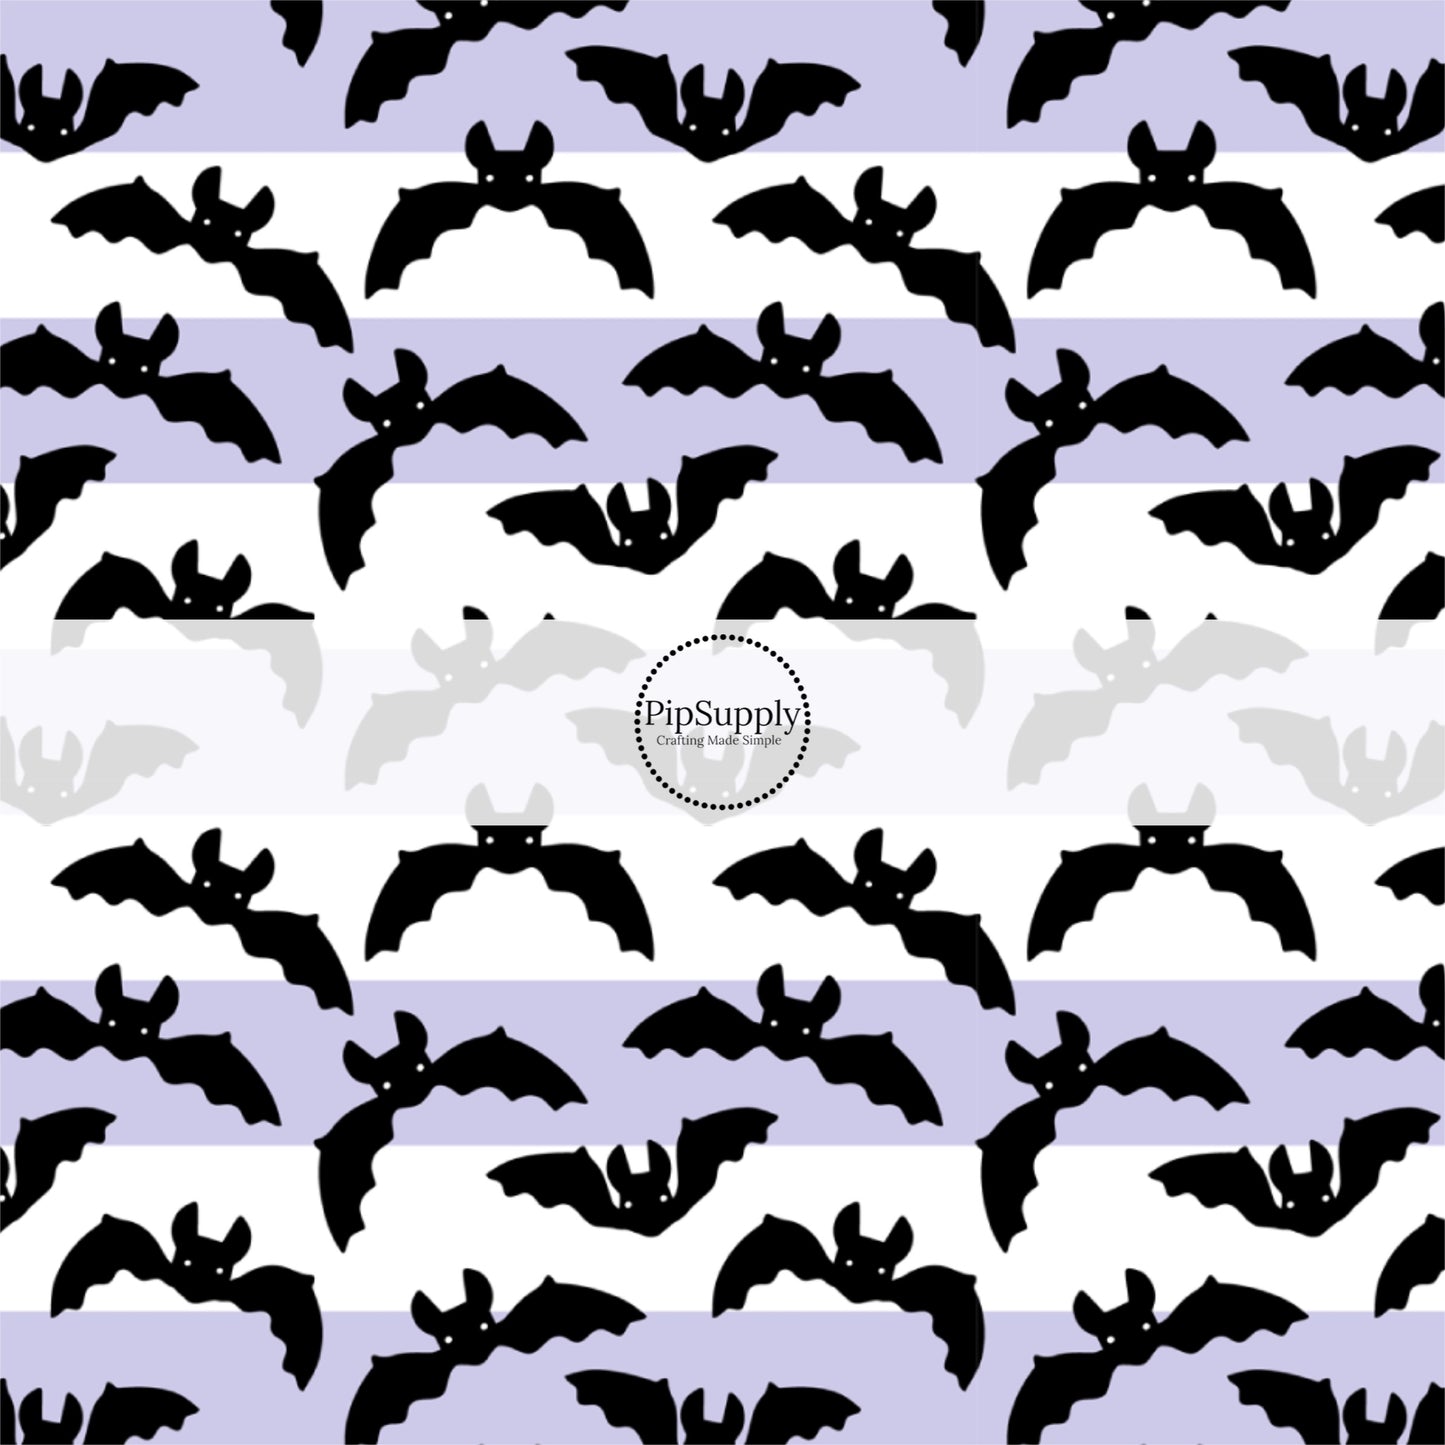 Lavender striped fabric by the yard with black flying bats.